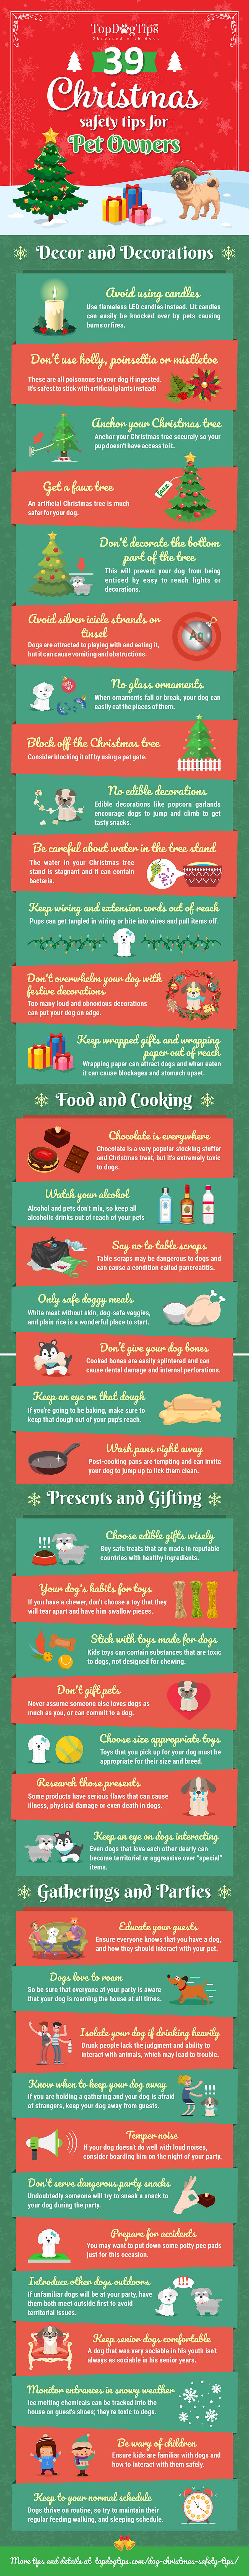 39 Christmas Safety Tips For Pet Owners